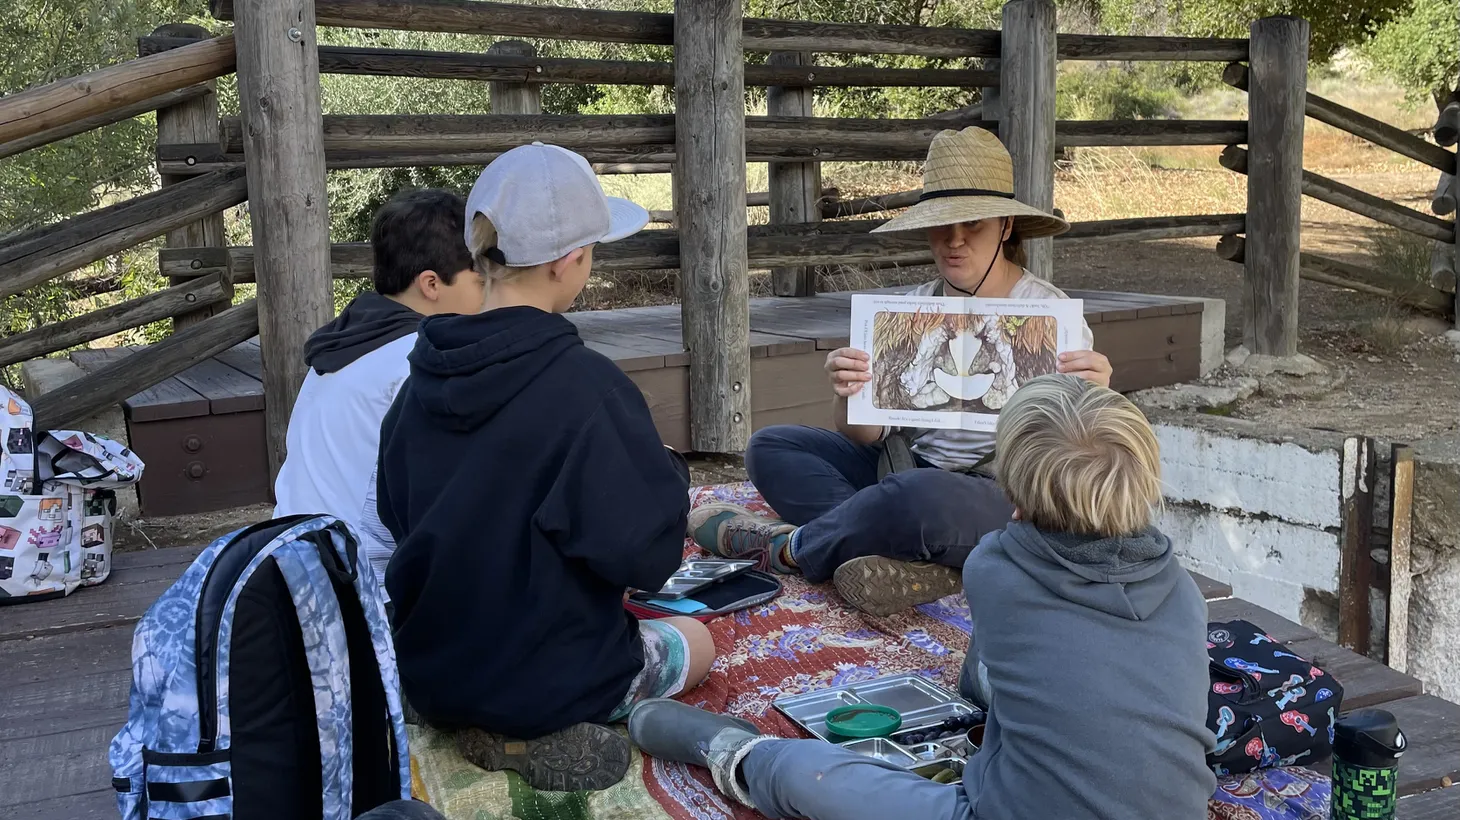 Children’s Forest School Co-founder Madlen Sarkisyan reads a story to homeschooled kids in a Simi Valley park.